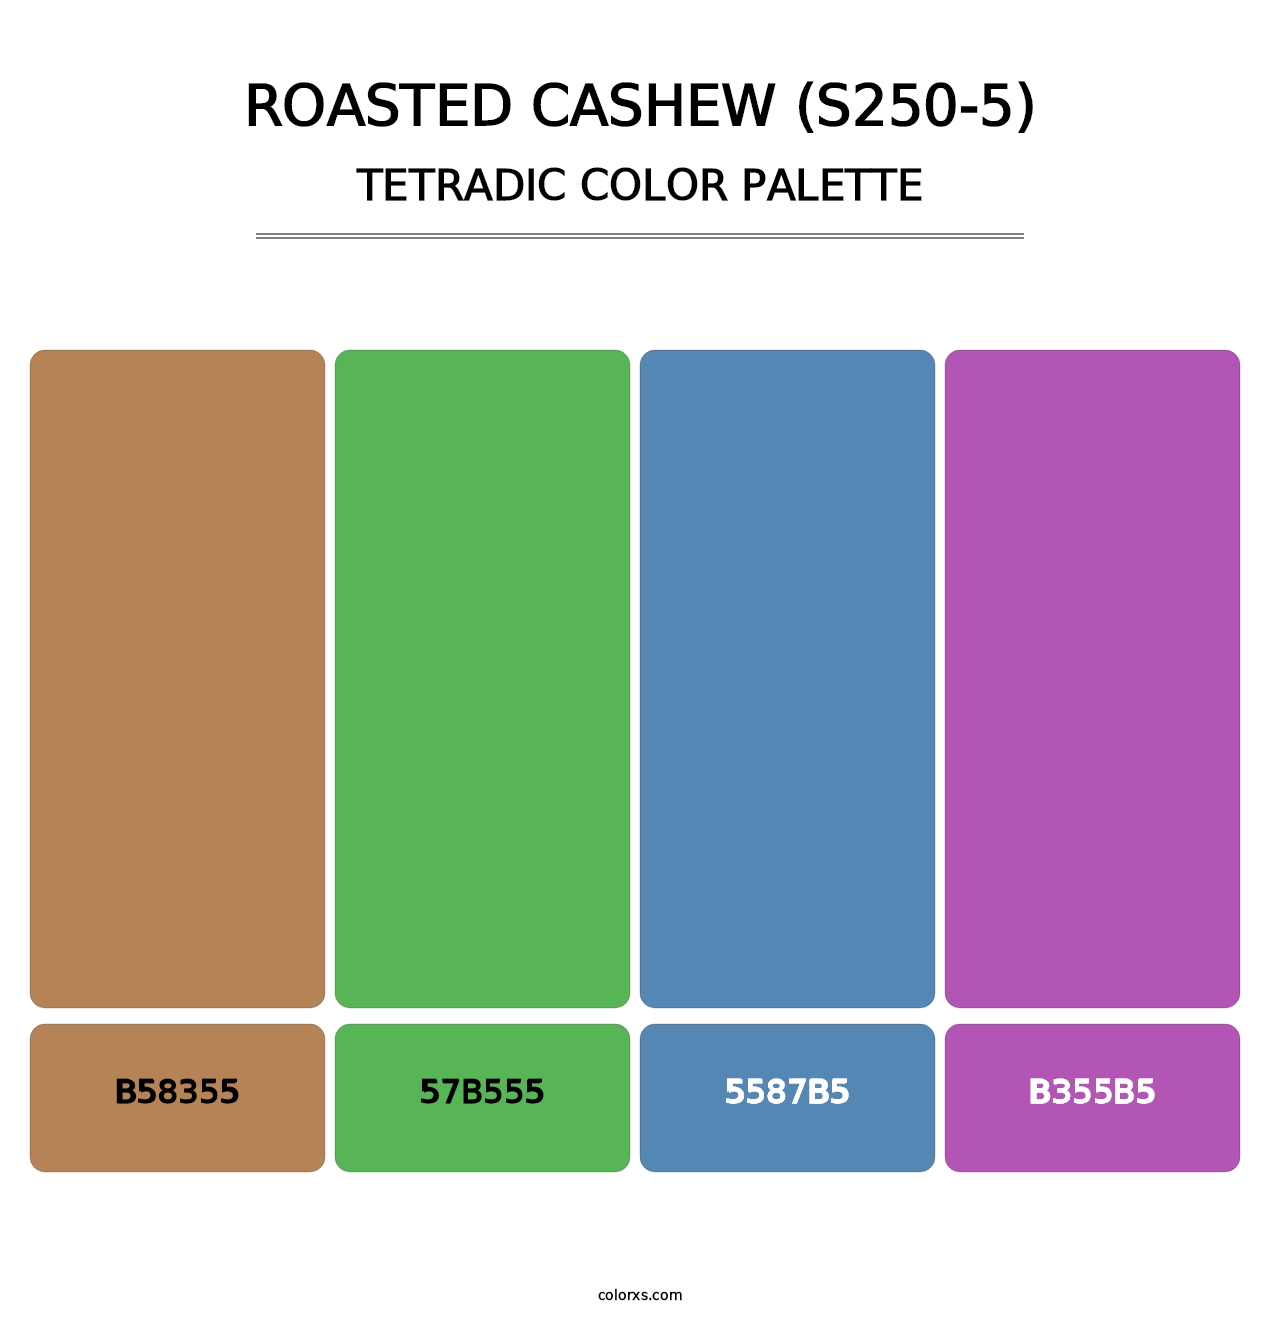 Roasted Cashew (S250-5) - Tetradic Color Palette